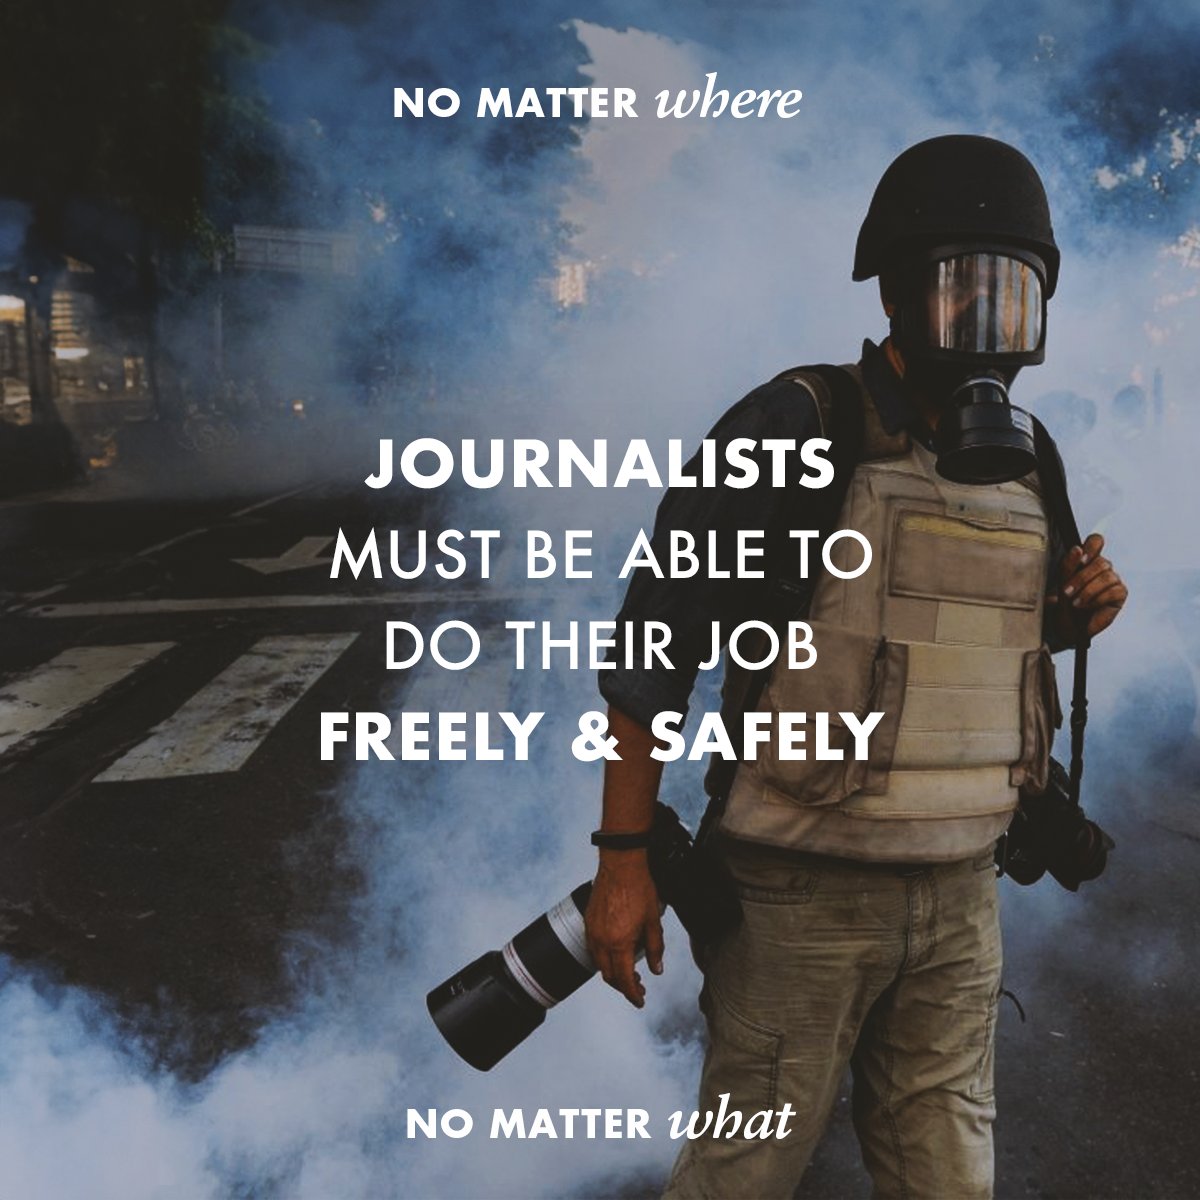 Journalists must be able to do their job freely & safely. No matter where, no matter what. Learn how @UNHumanRights is working to promote independent press & strengthen accountability for violations against journalists: ow.ly/wUeZ50RB7QY